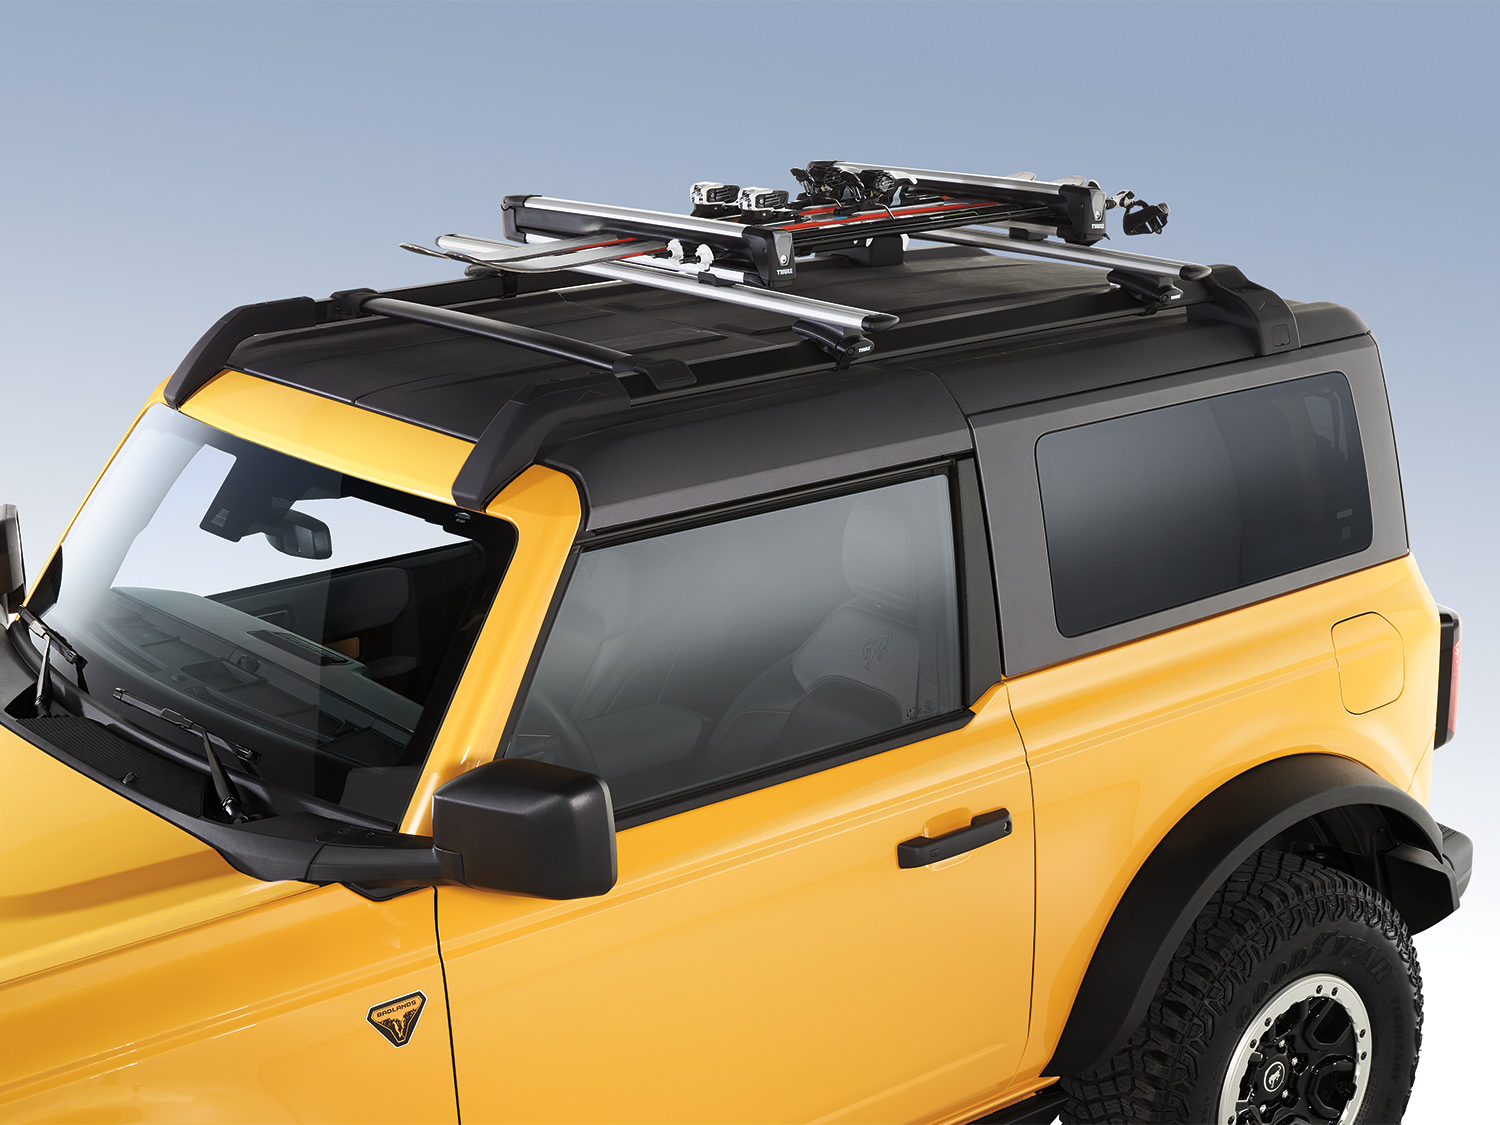 Image for Racks and Carriers by Thule - Ski/Snowboard Carrier, Rack-Mounted, Flat Top, Carries 6 Pairs of Skis or 4 Snow from AccessoriesCanada